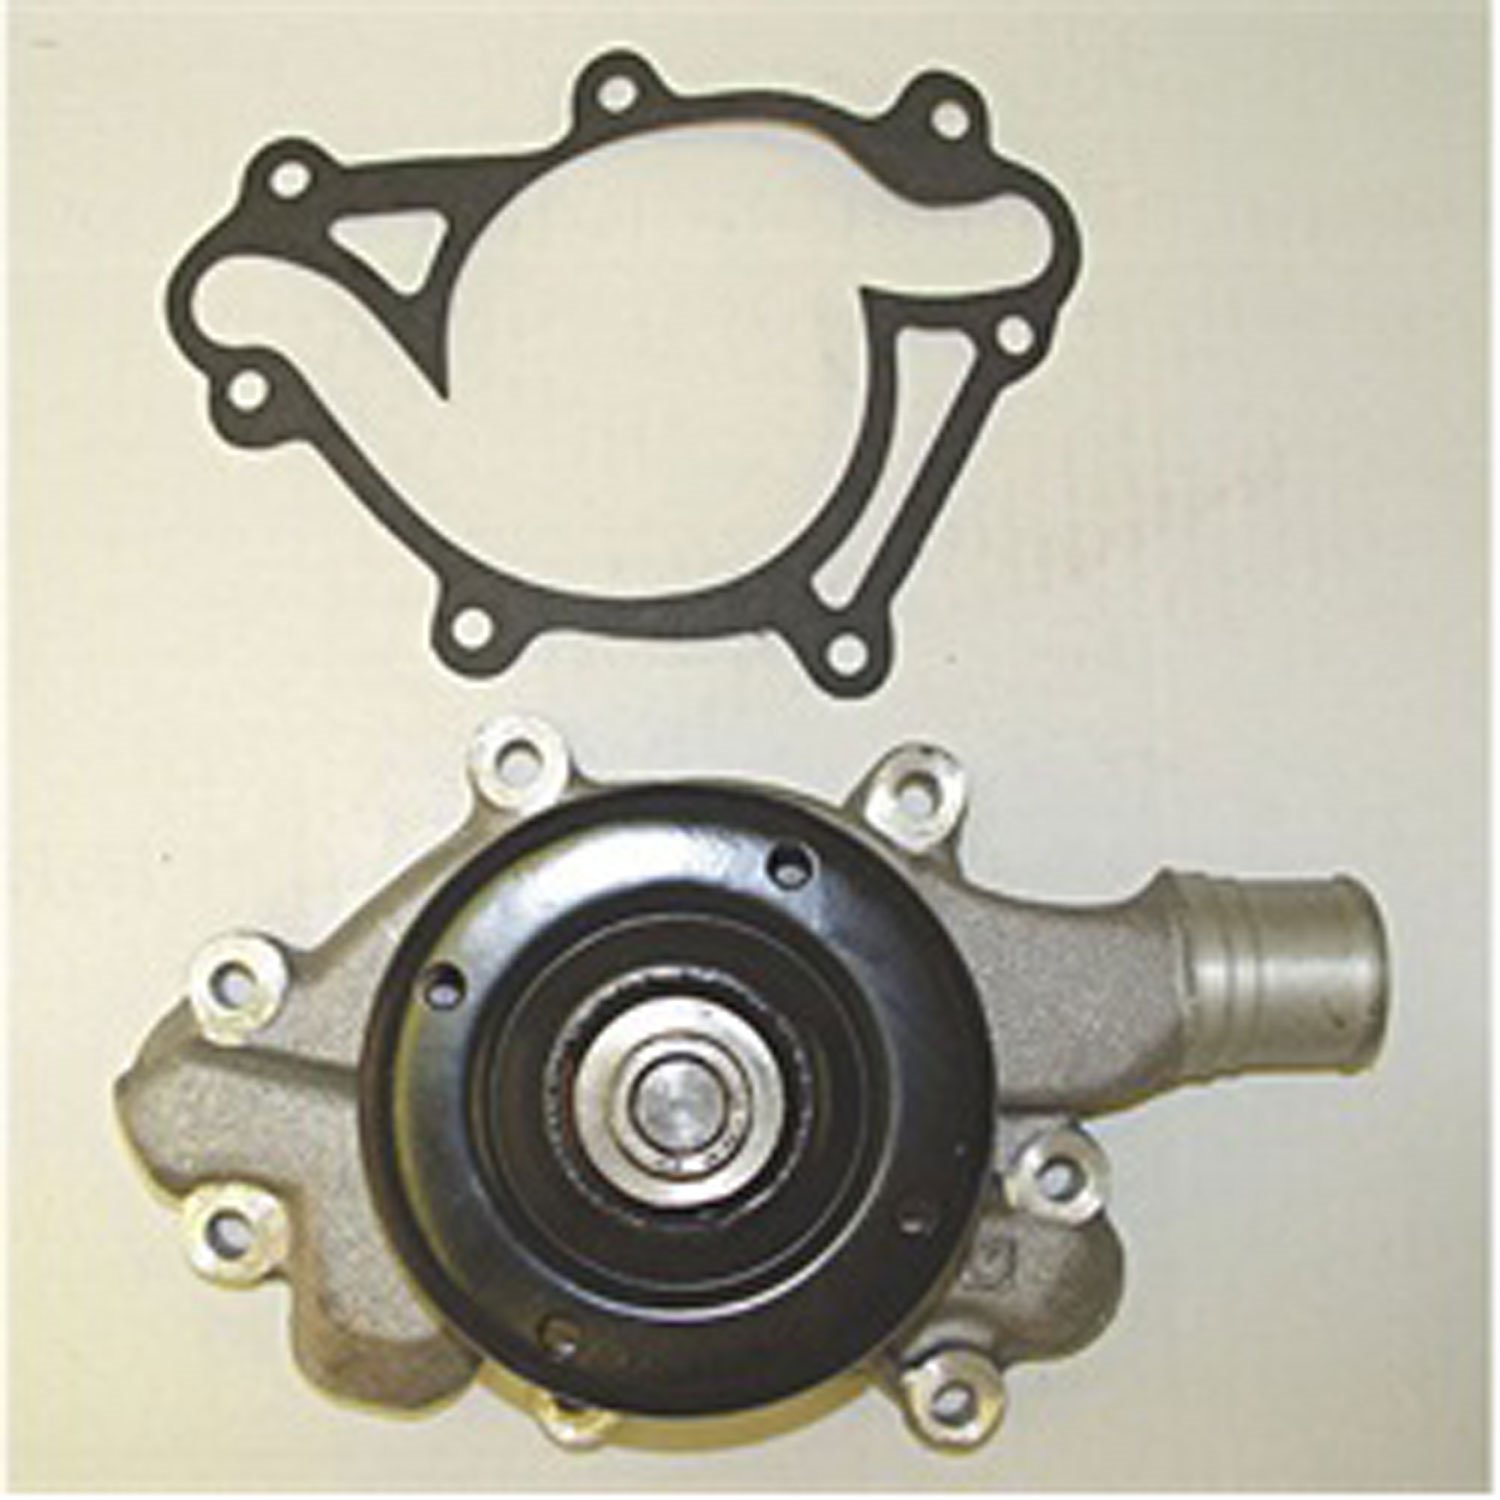 Replacement water pump from Omix-ADA, Fits 93-98 Jeep Grand Cherokees with a 5.2 liter engine an